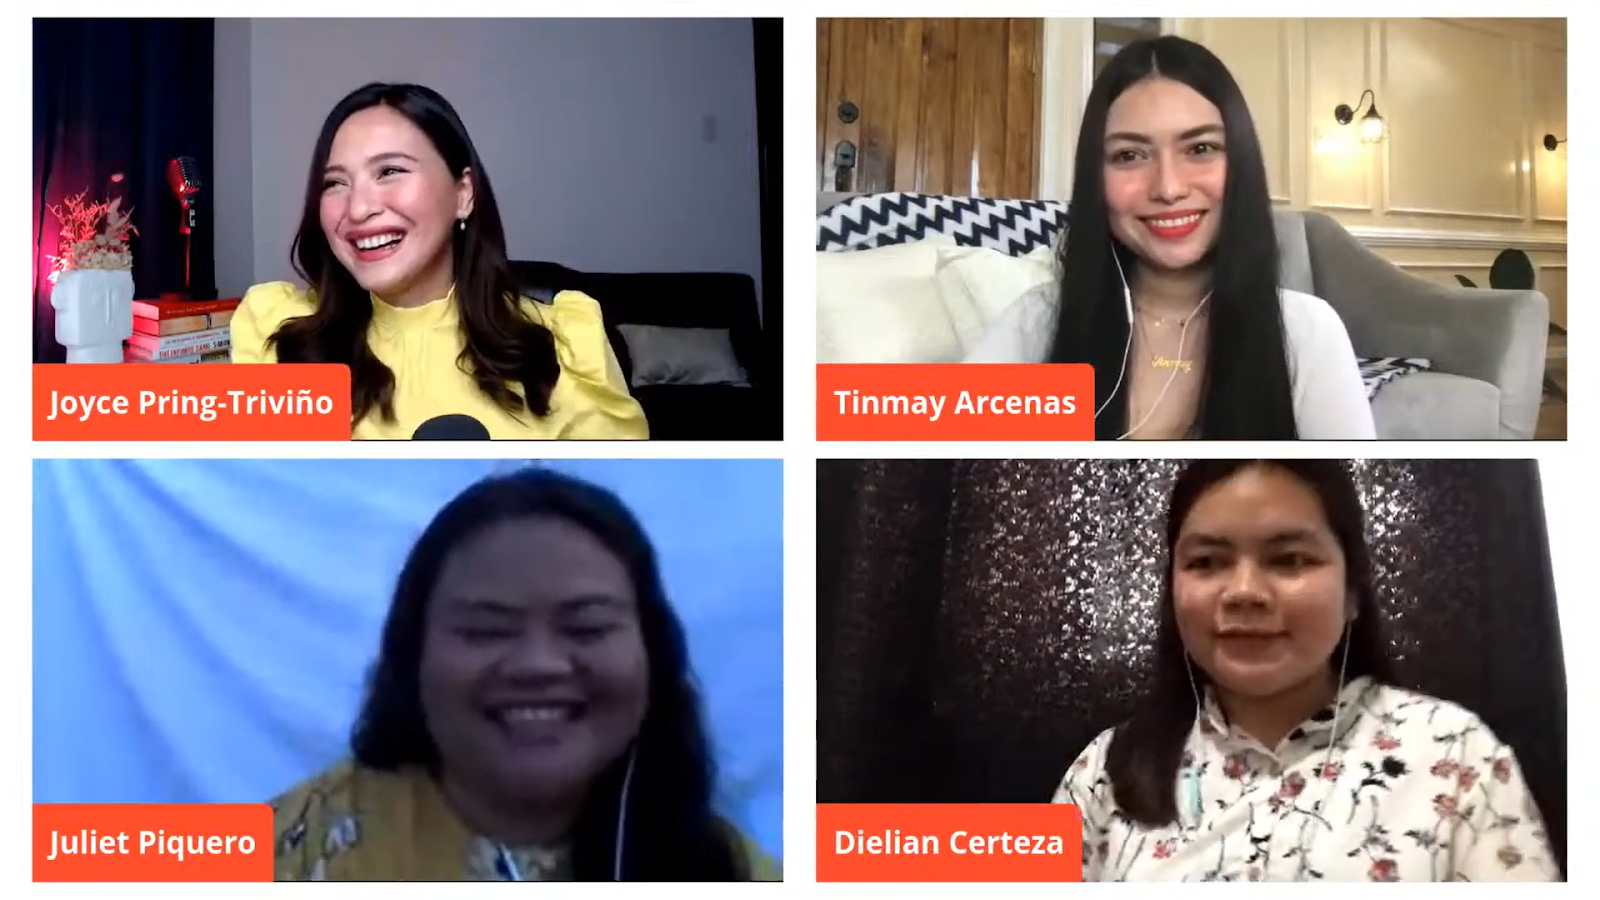 Digiskarteng Pinay Online Event Inspired Filipinas To Upskill And Create Livelihood With YouTube